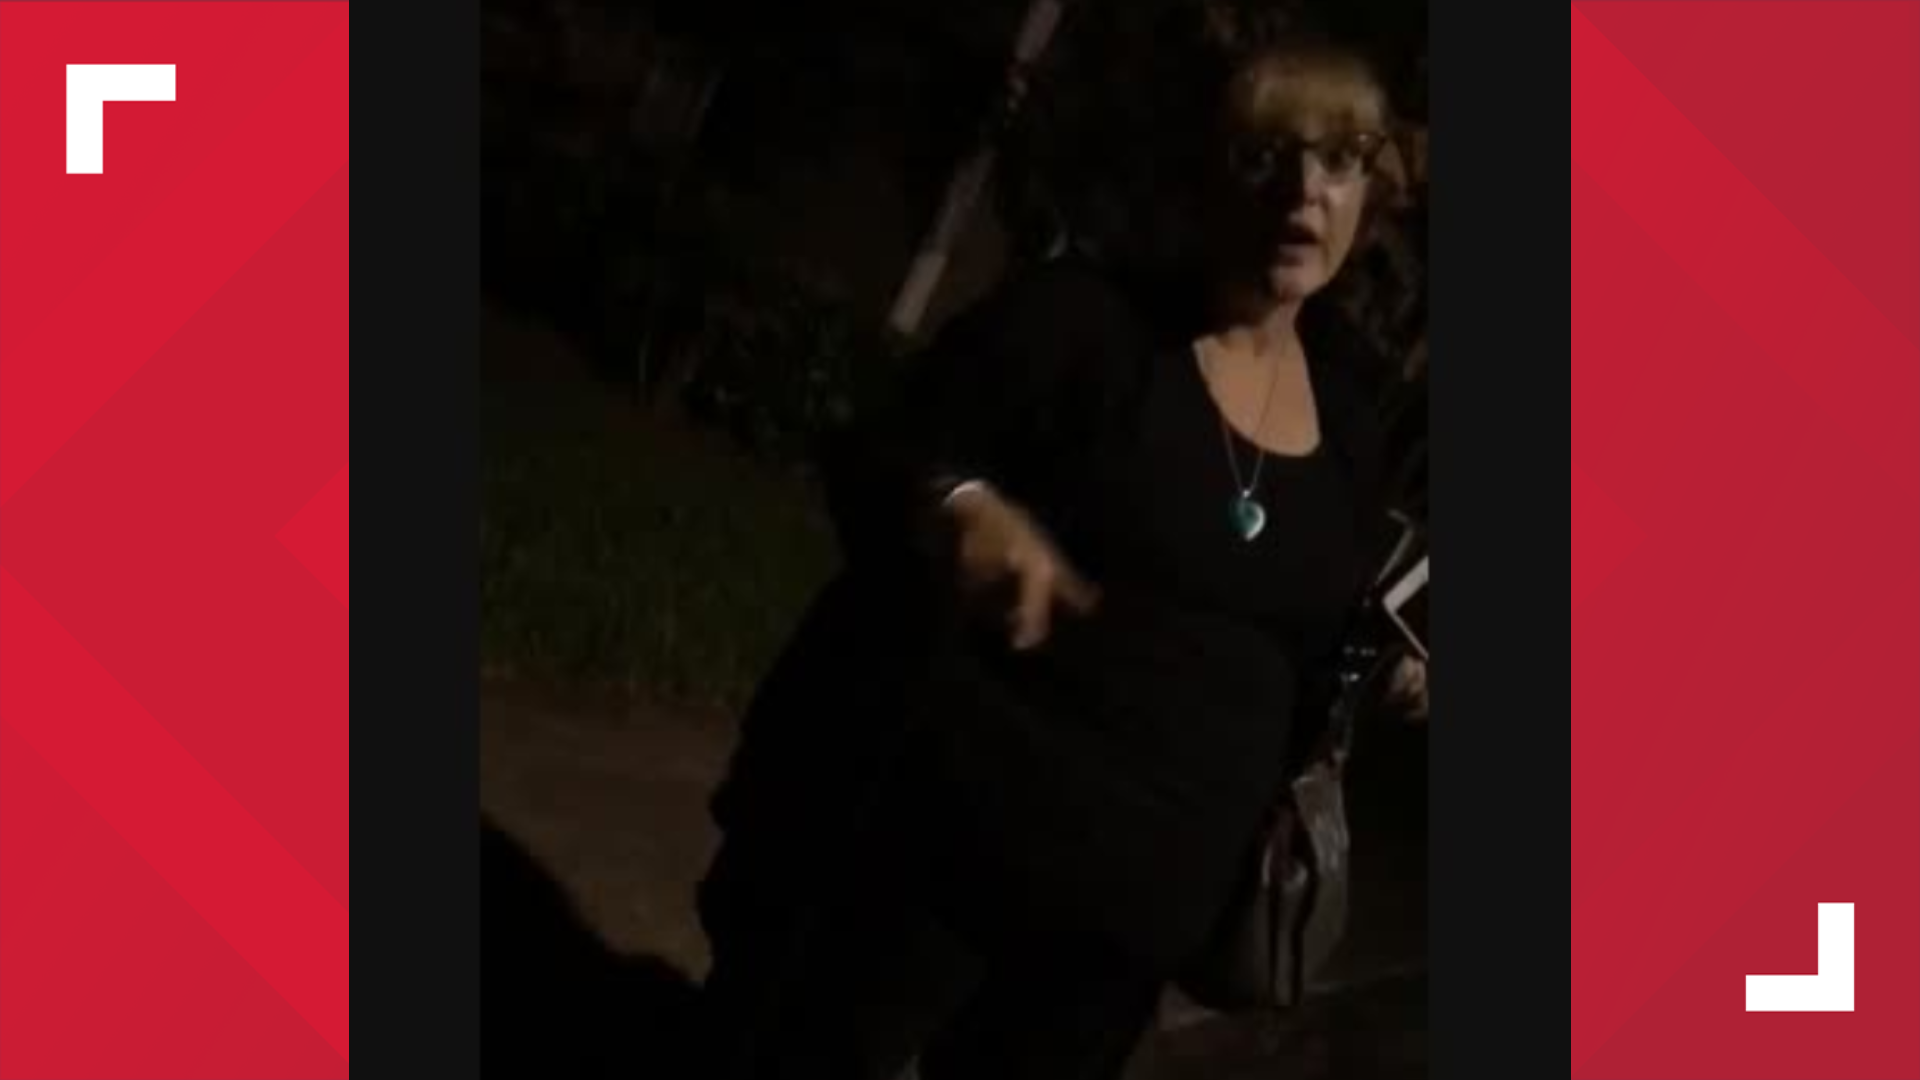 A property manager at a Jacksonville apartment complex approaches a resident in 2018 demanding to see her ID to prove she lives there.